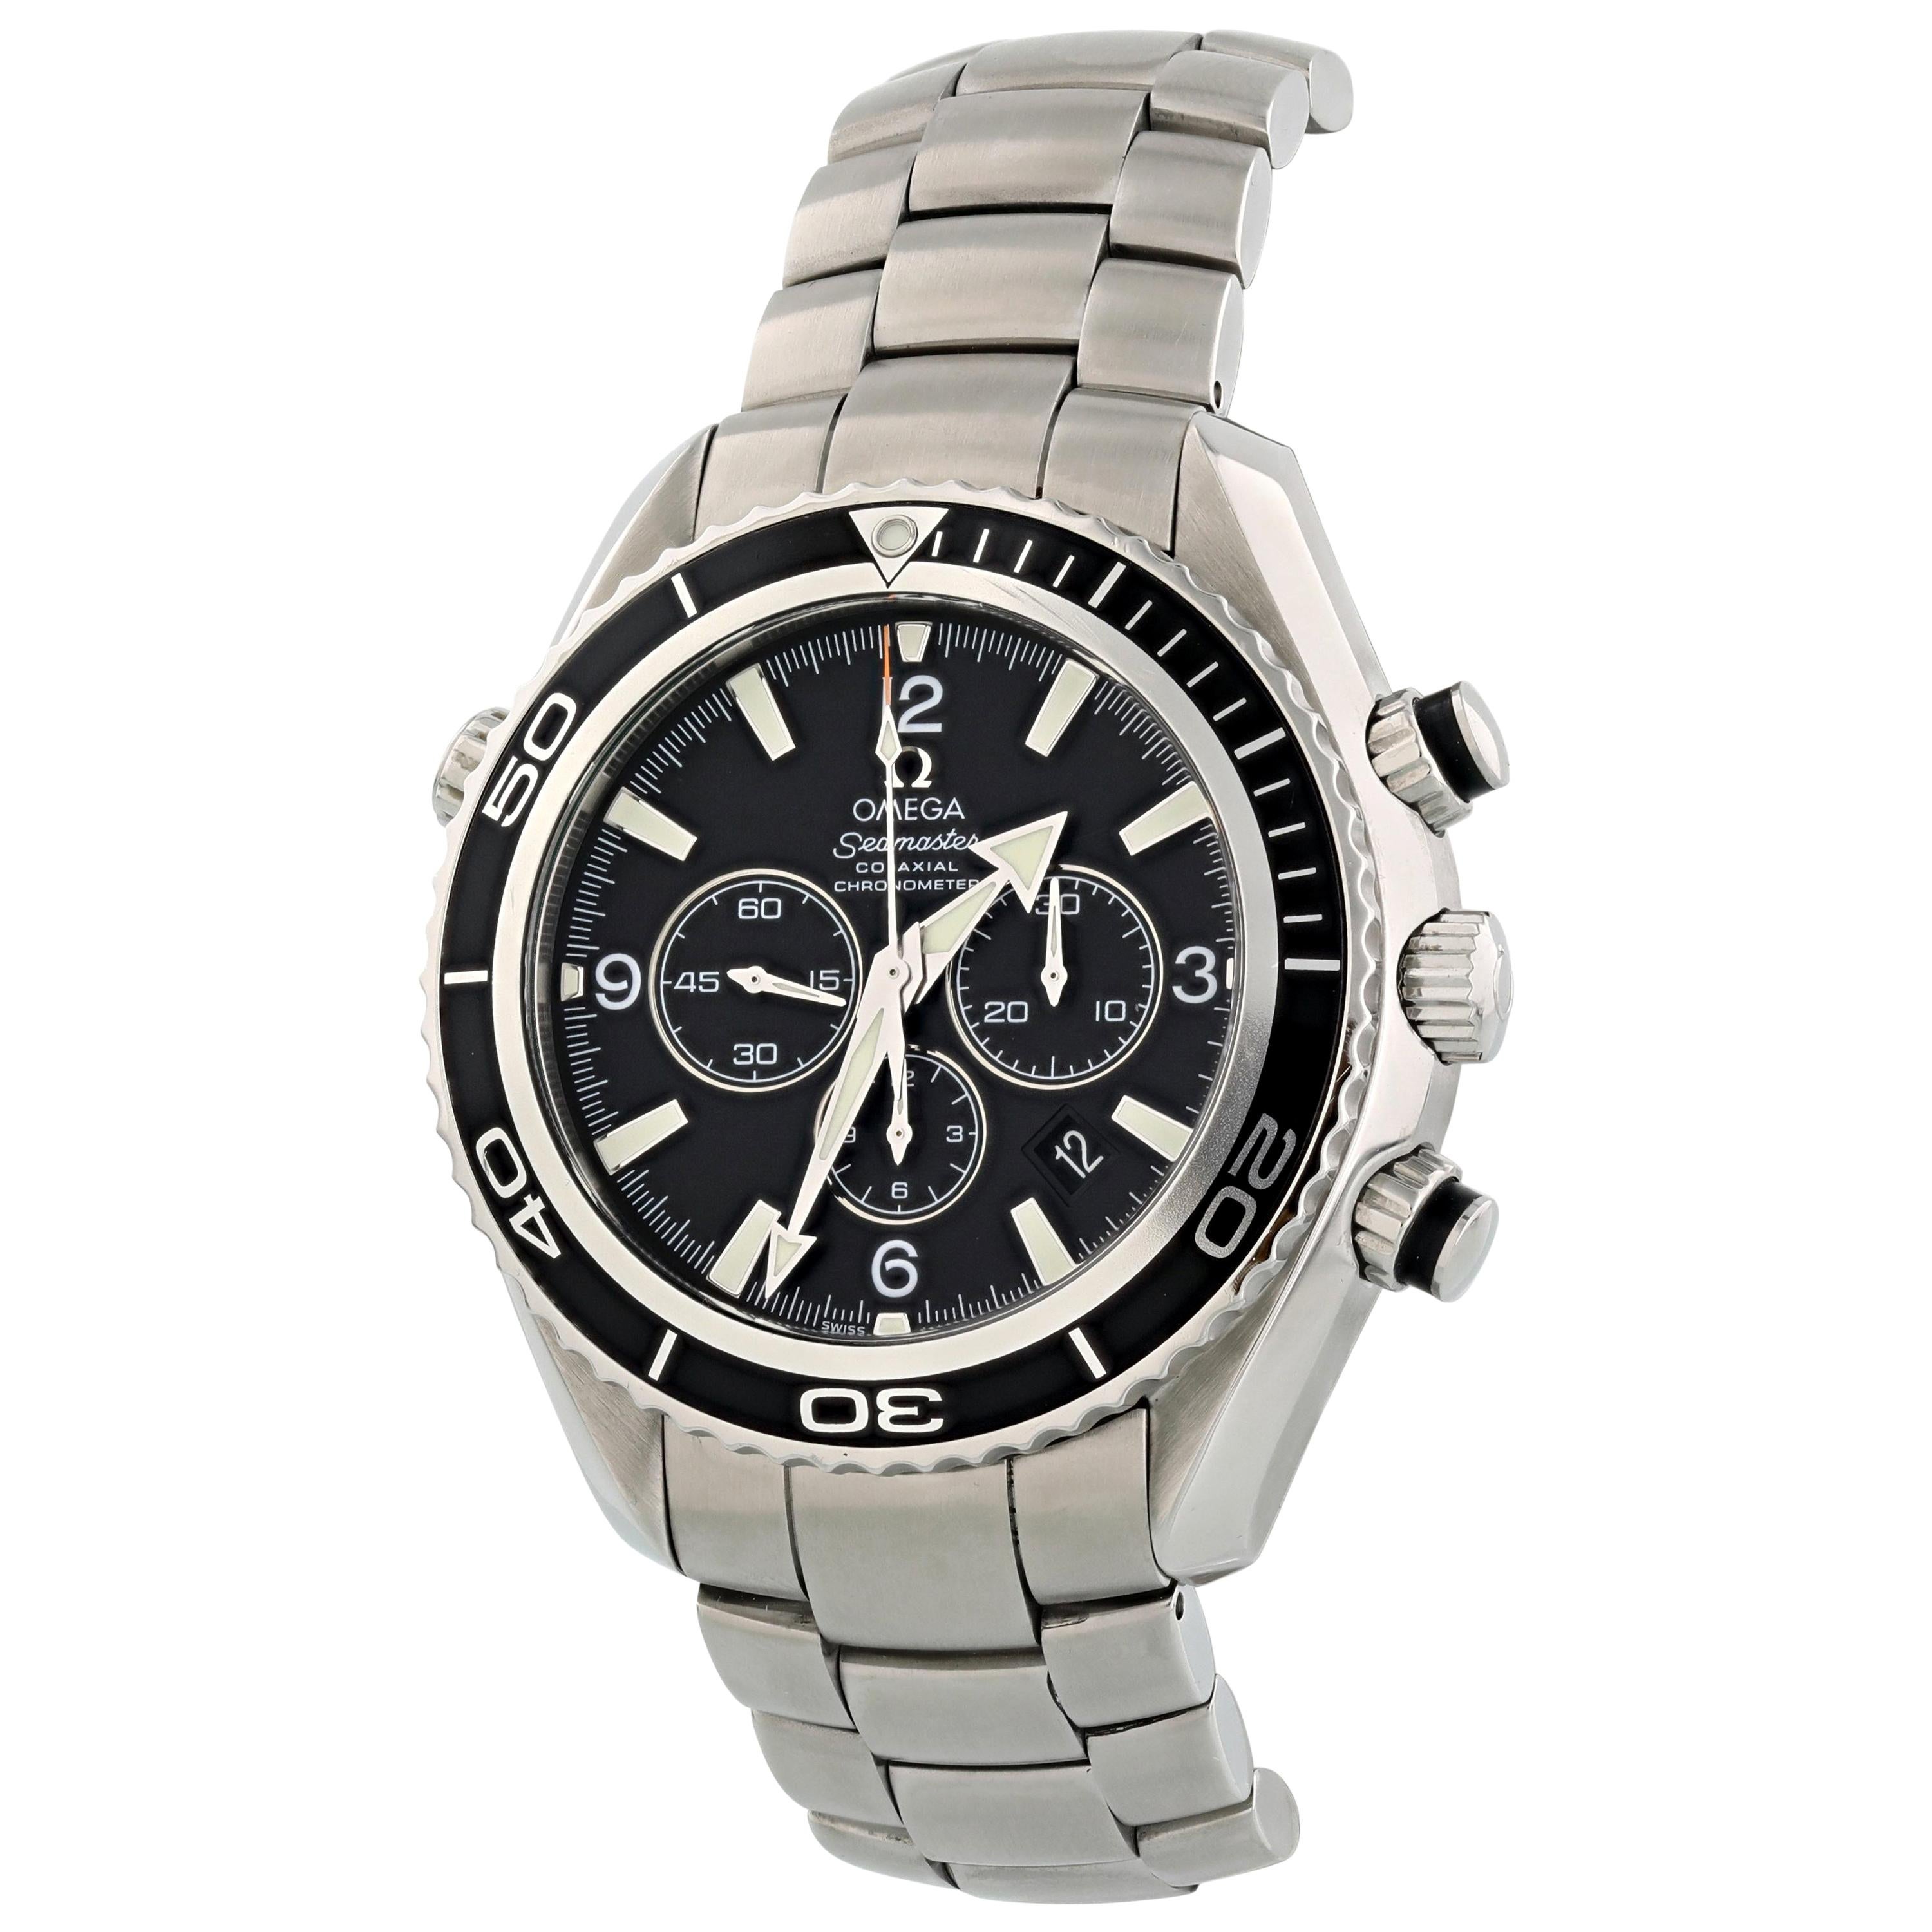 Omega Seamaster Planet Ocean 2210.50.00 600M Co-Axial Men’s Watch For Sale